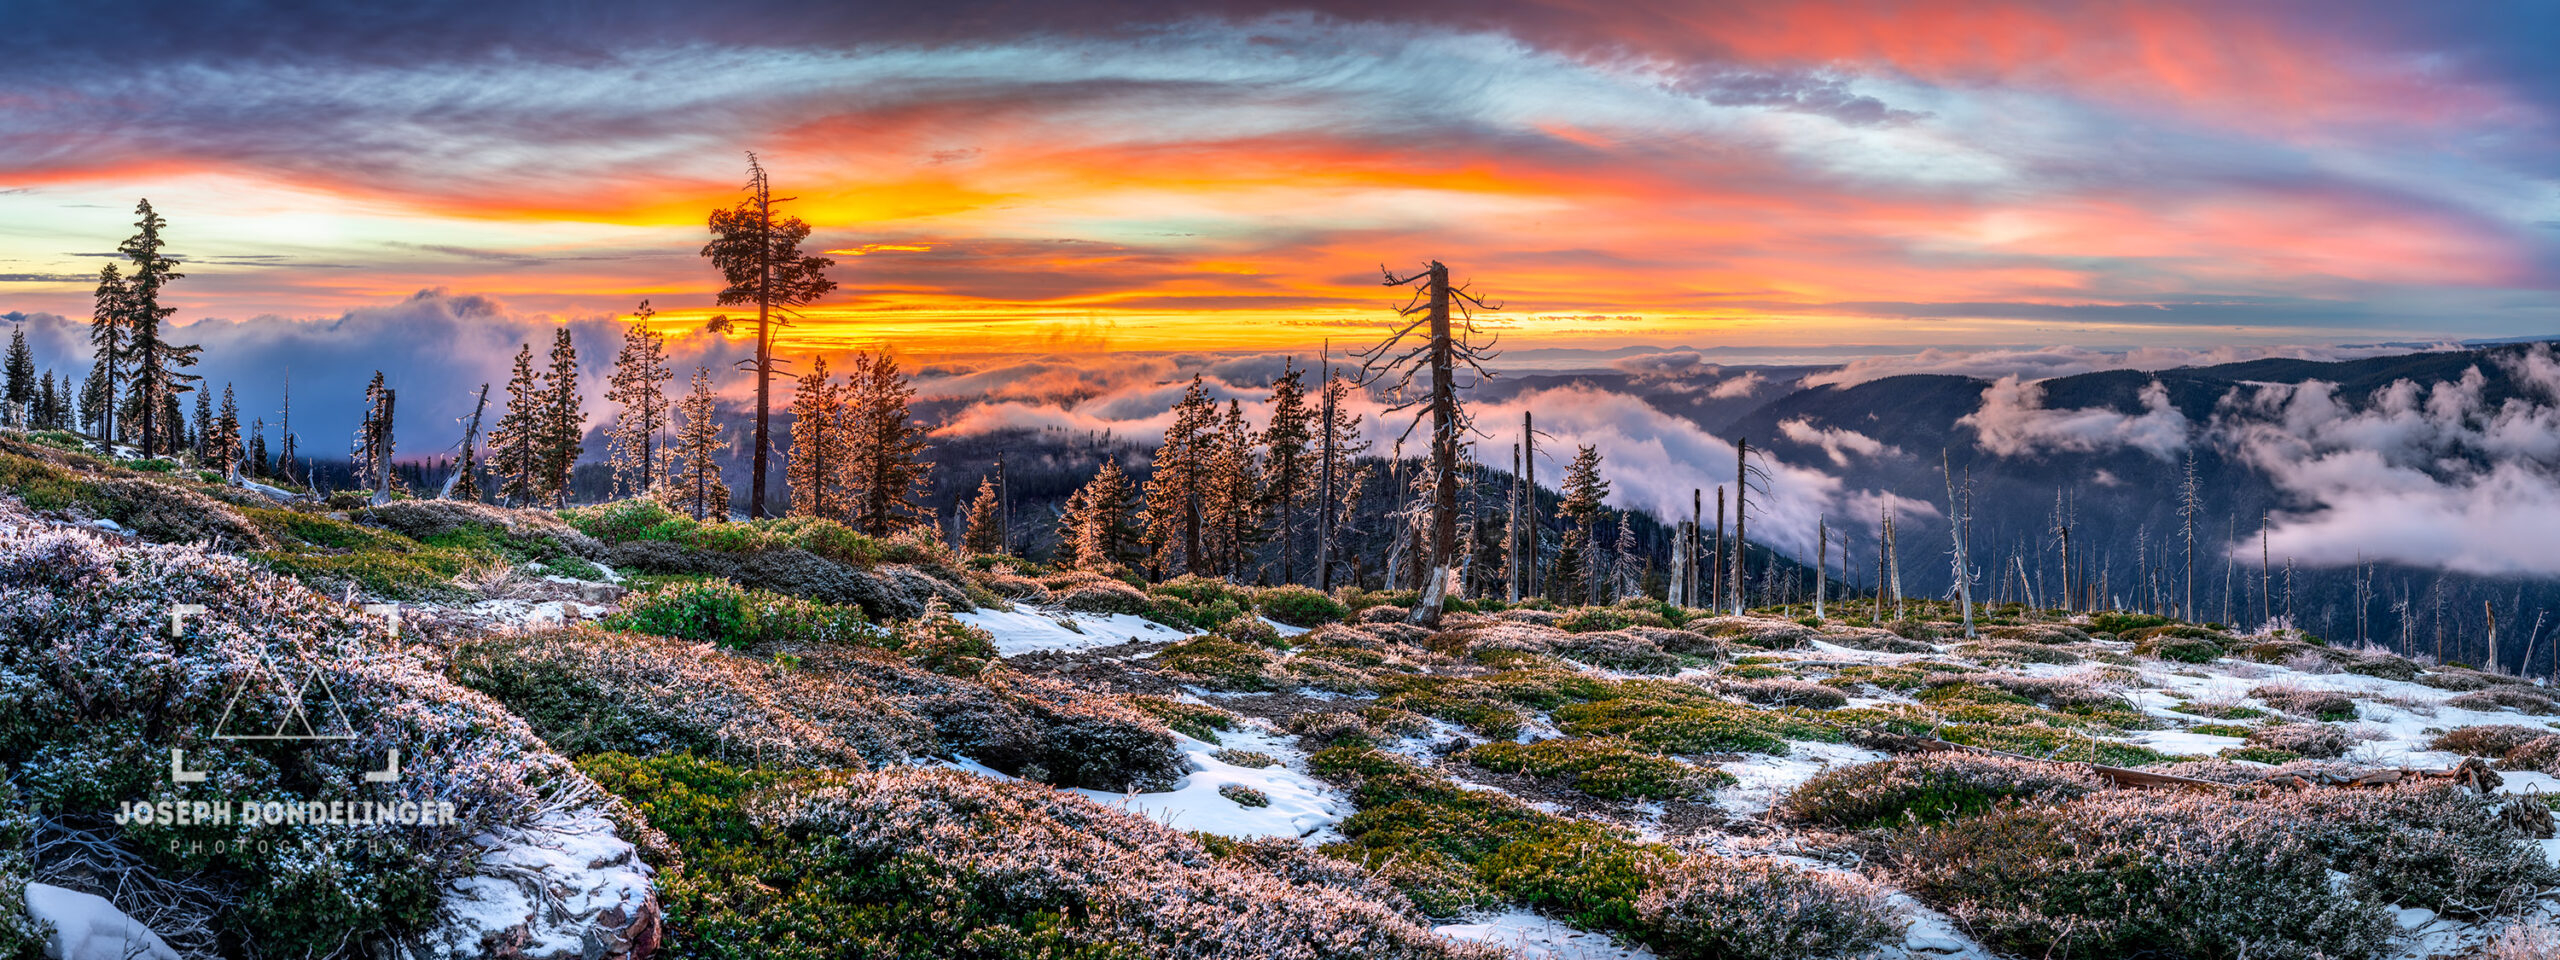 Panoramic image of a spectacular sunset over canyon fog